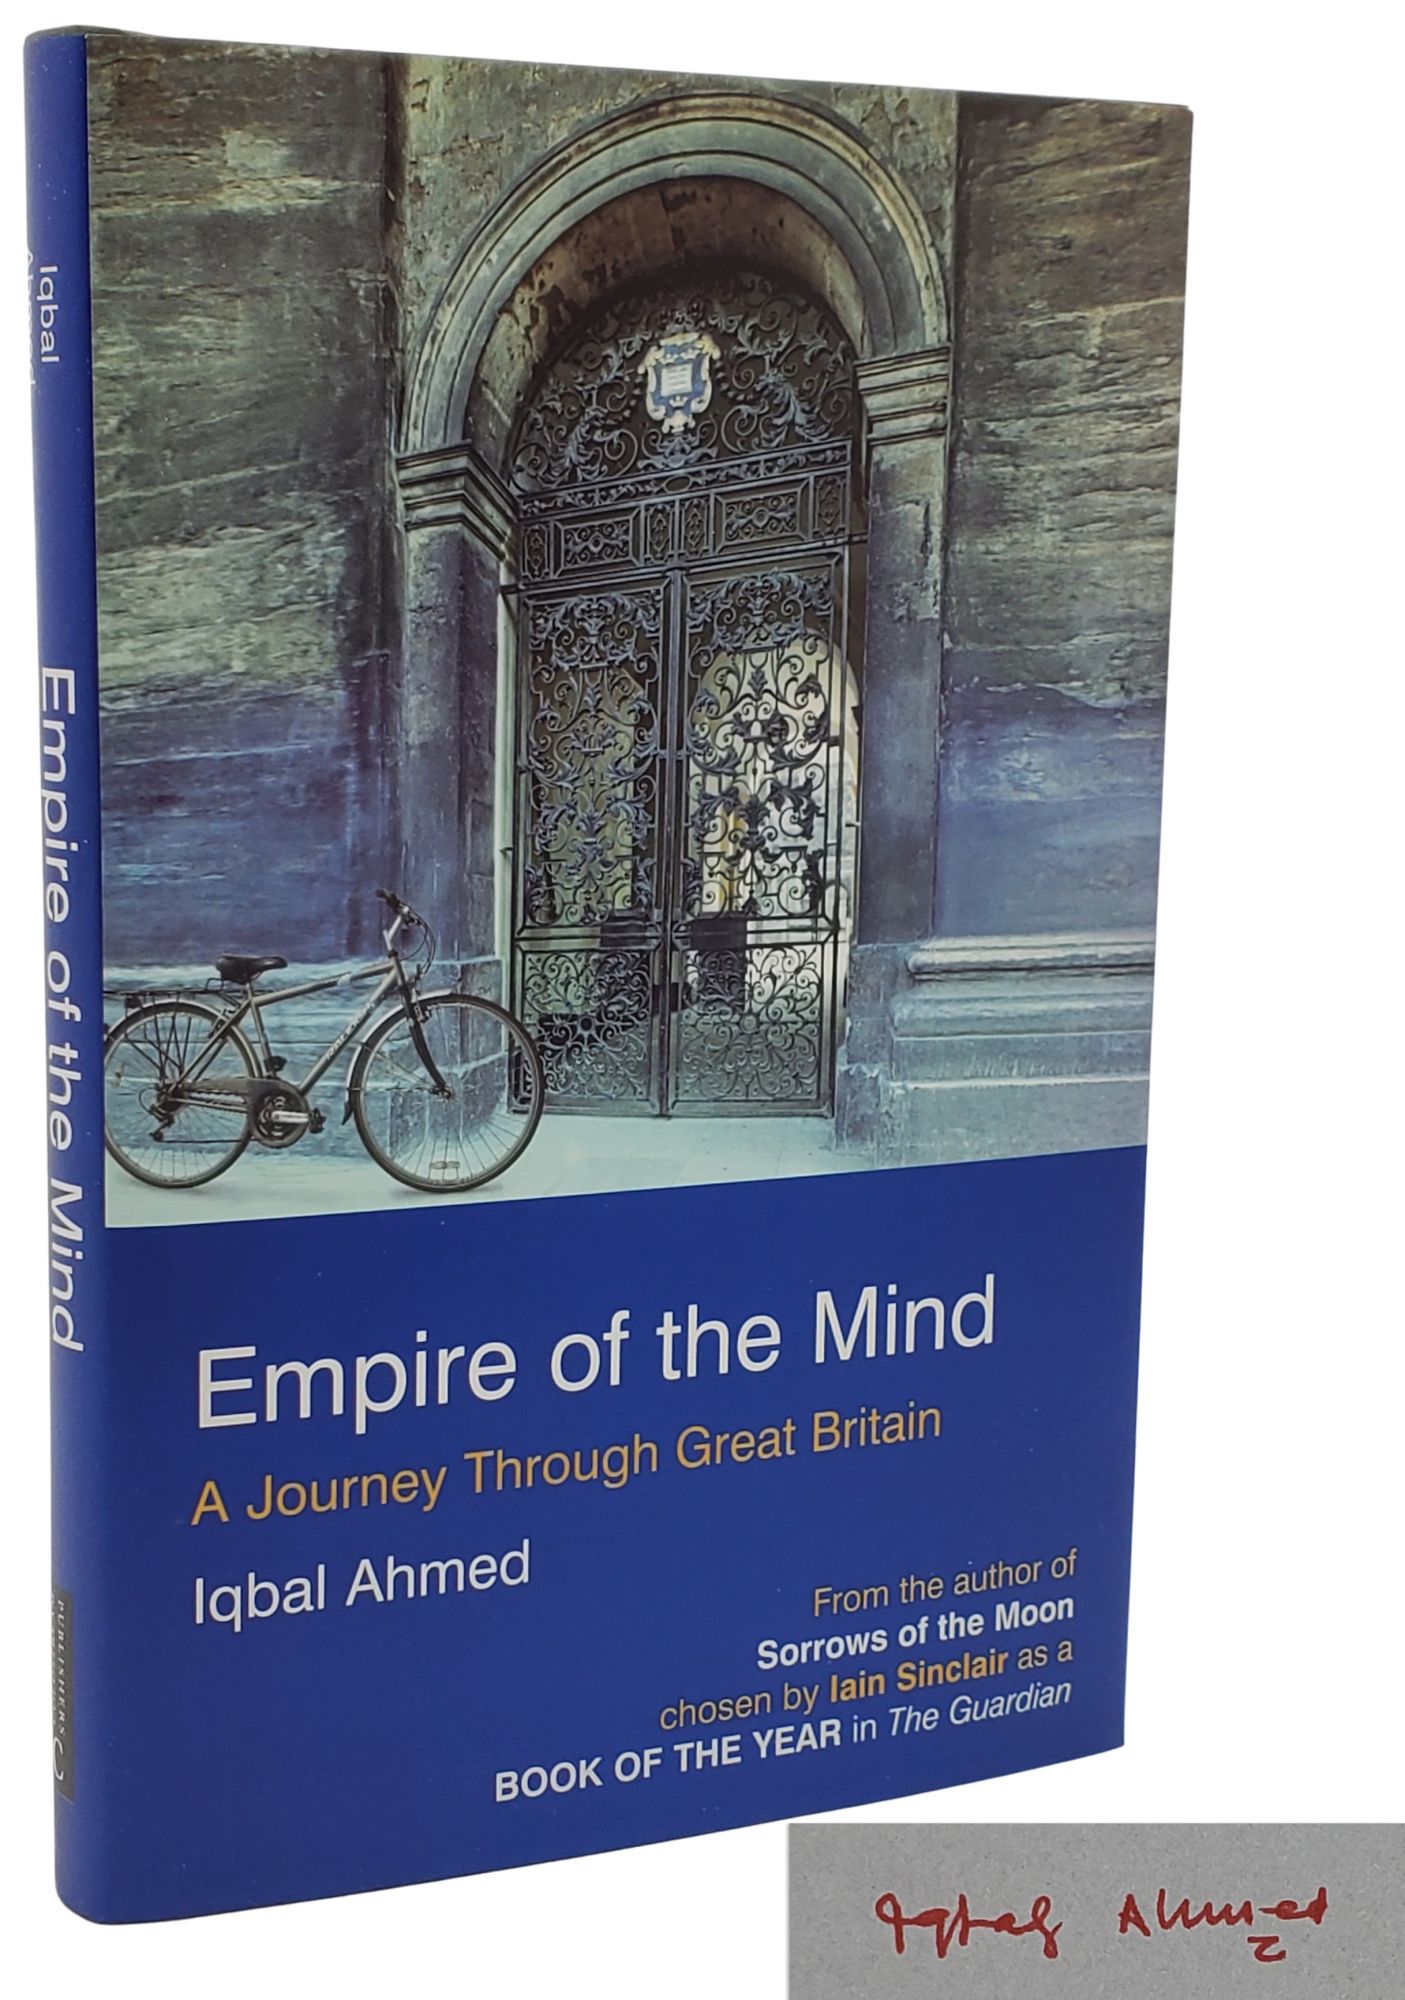 [Book #23215] EMPIRE OF THE MIND. A Journey Through Great Britain. Iqbal Ahmed.